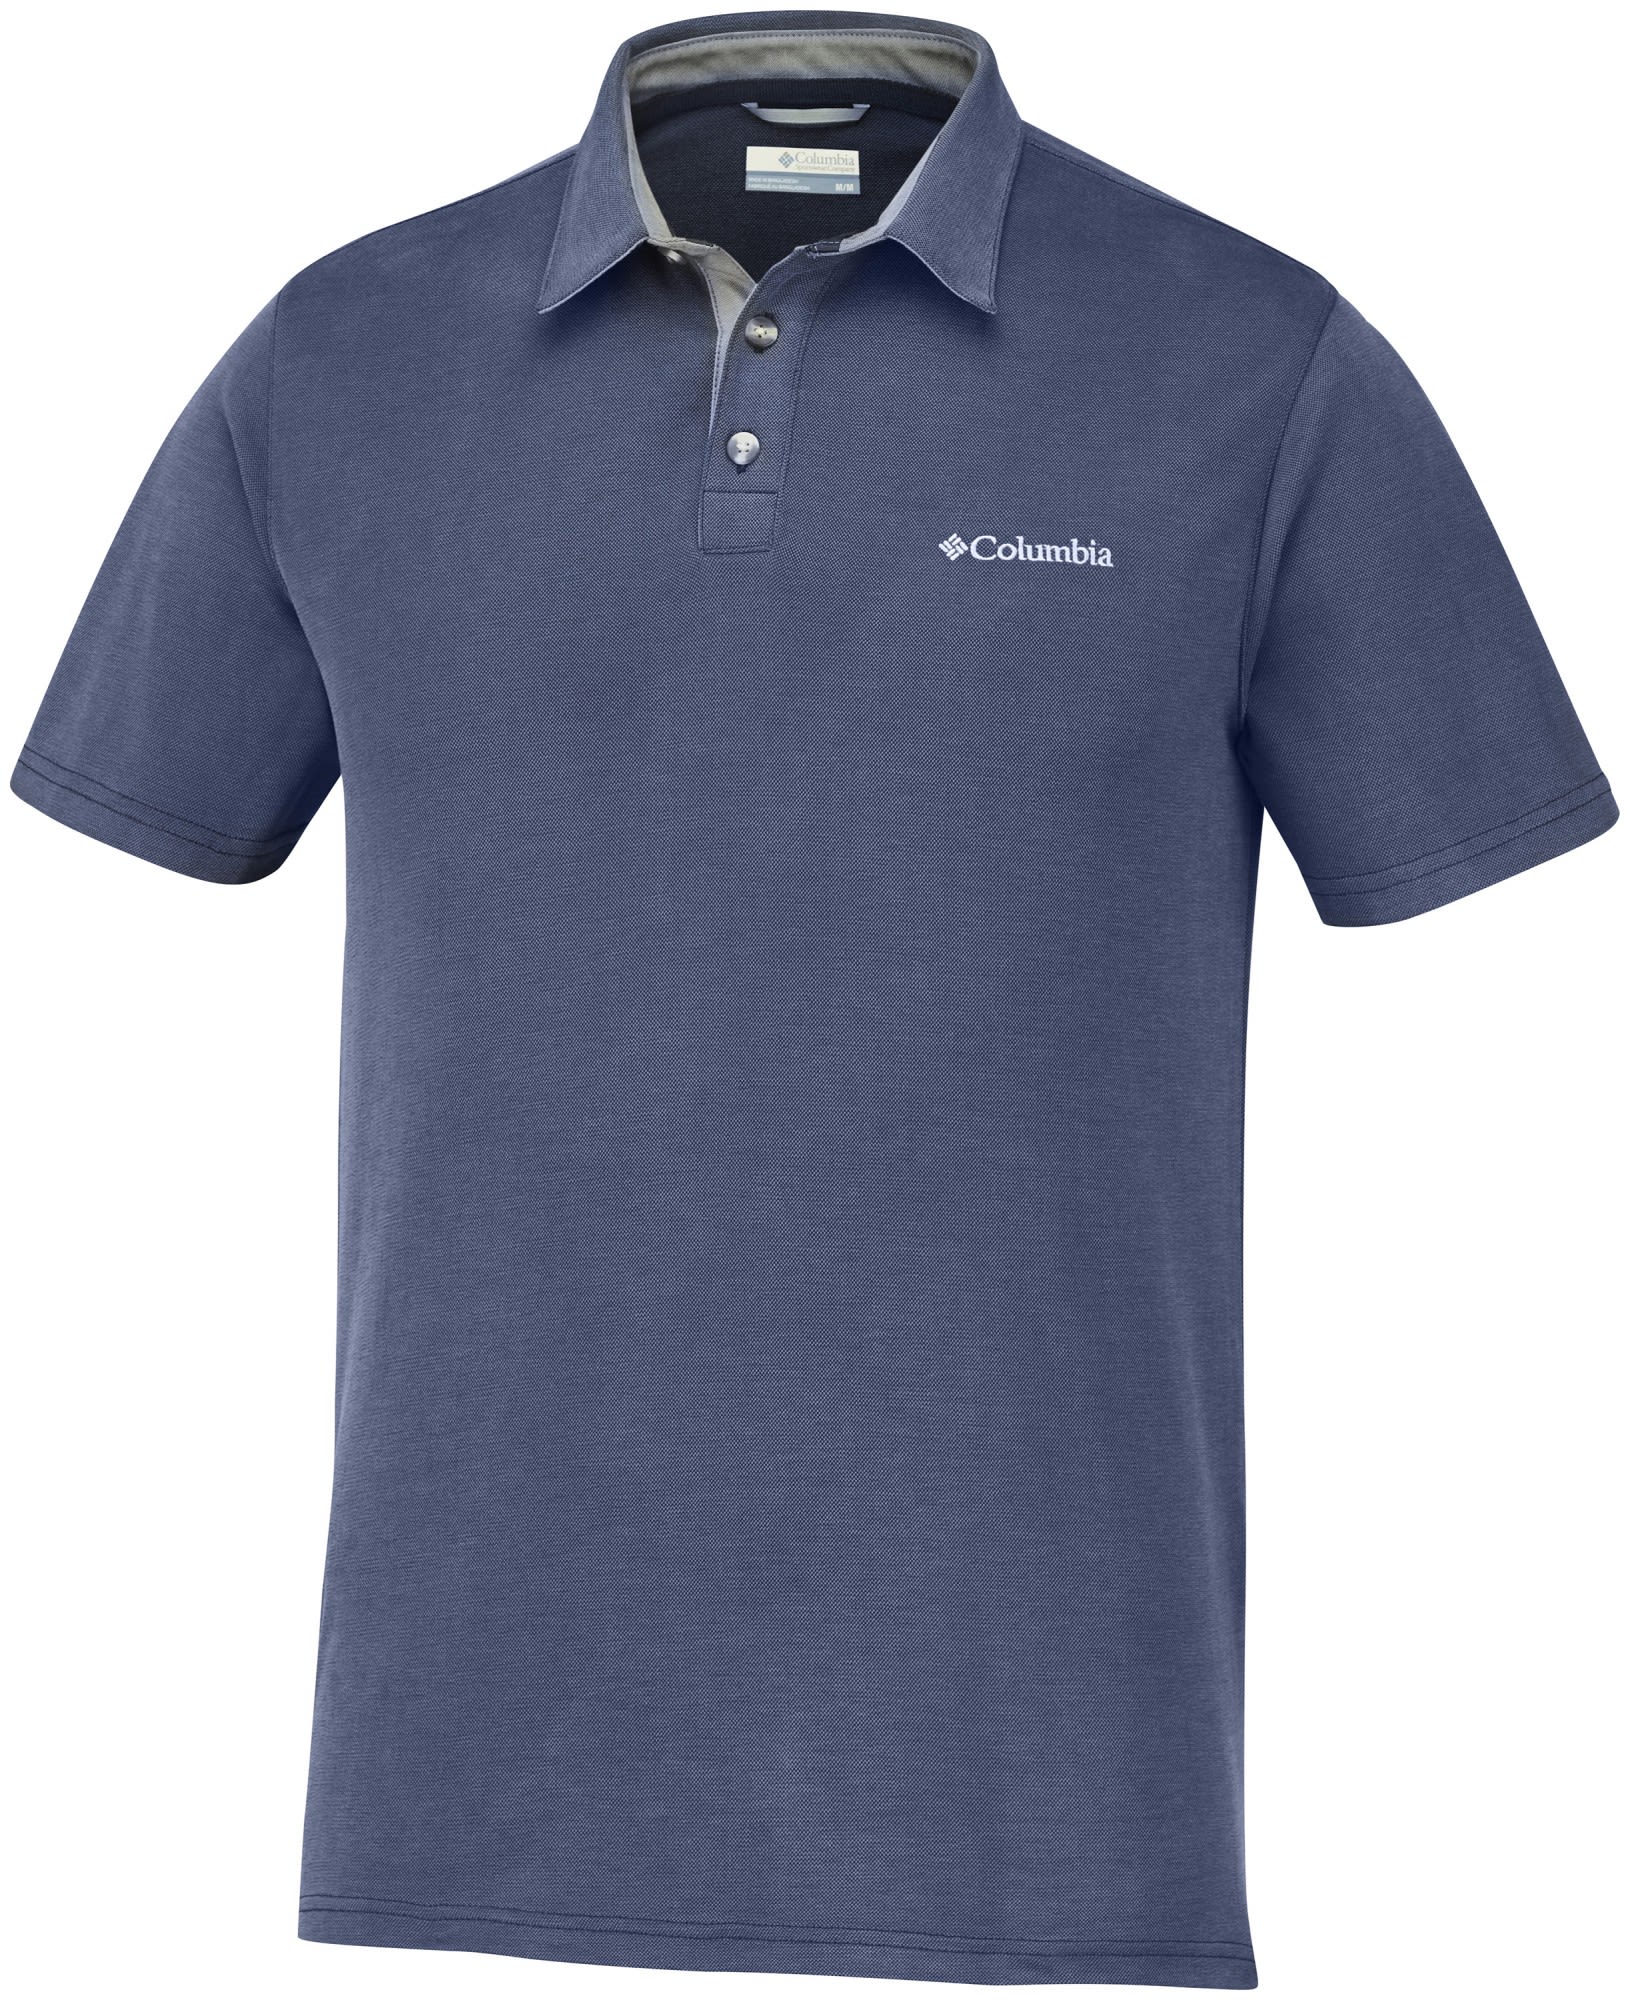 Columbia Nelson Point Polo Blau- Male Polo Shirts- Grsse S - Farbe Collegiate Navy unter Columbia